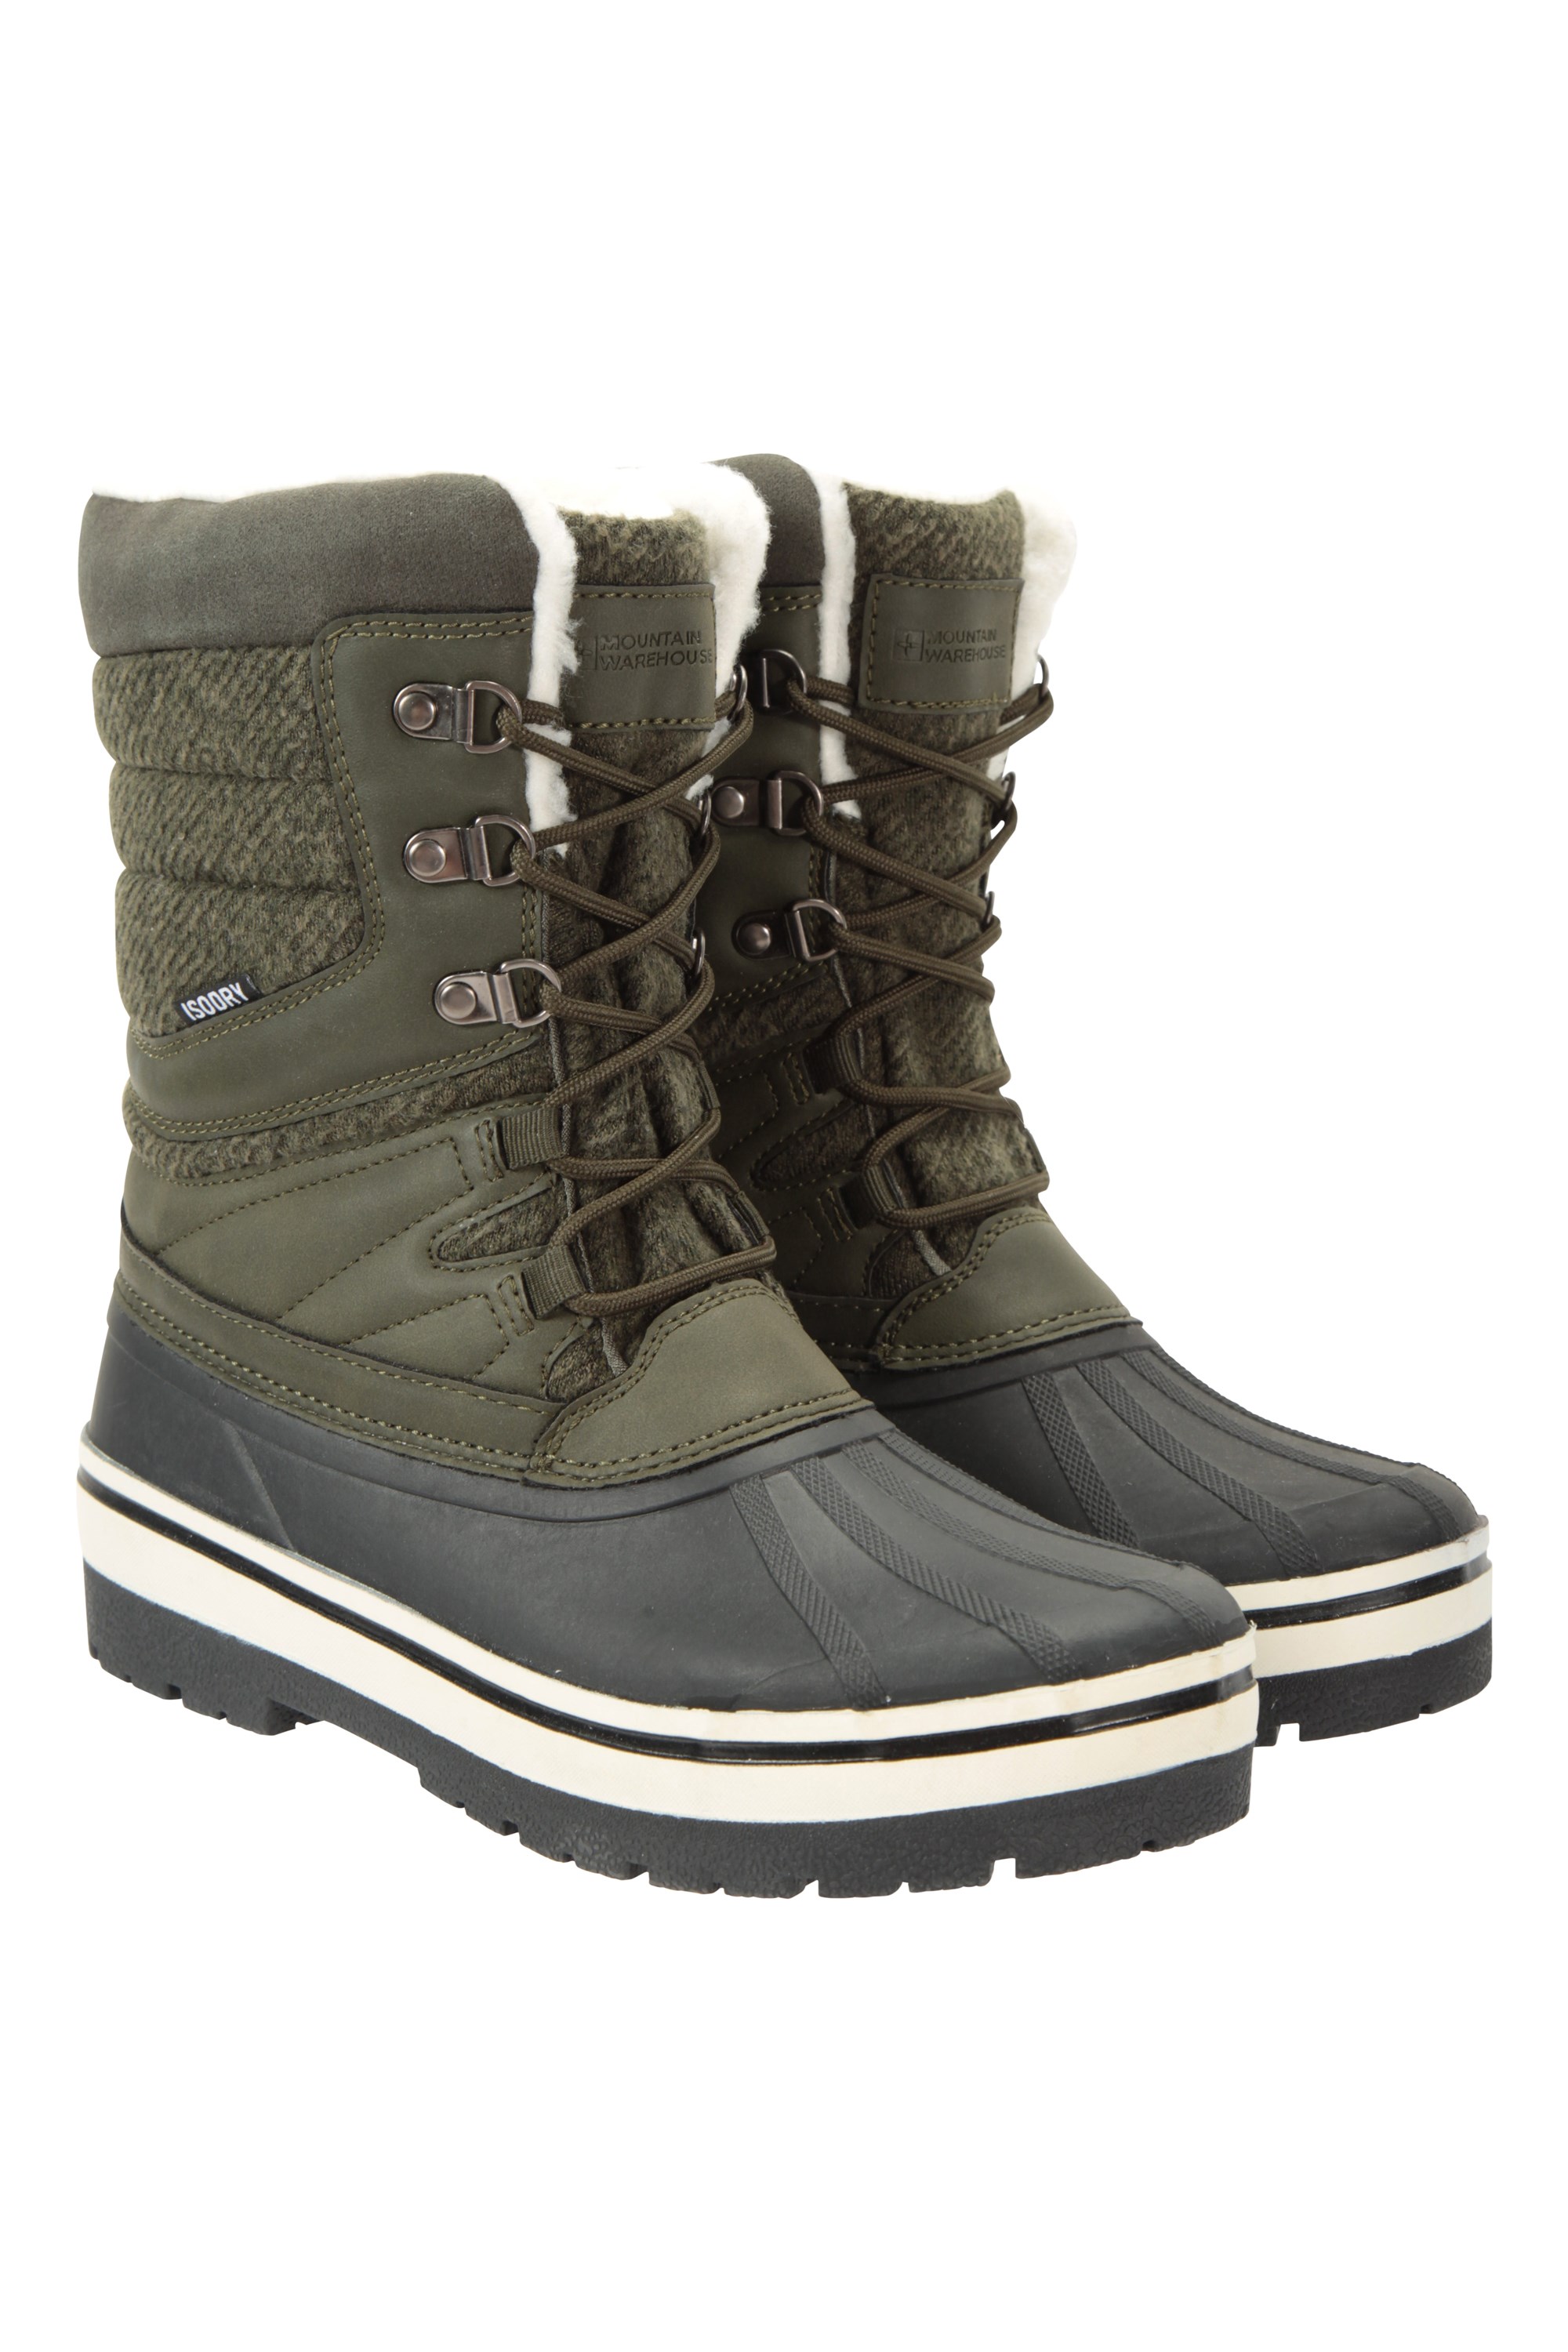 discount womens snow boots